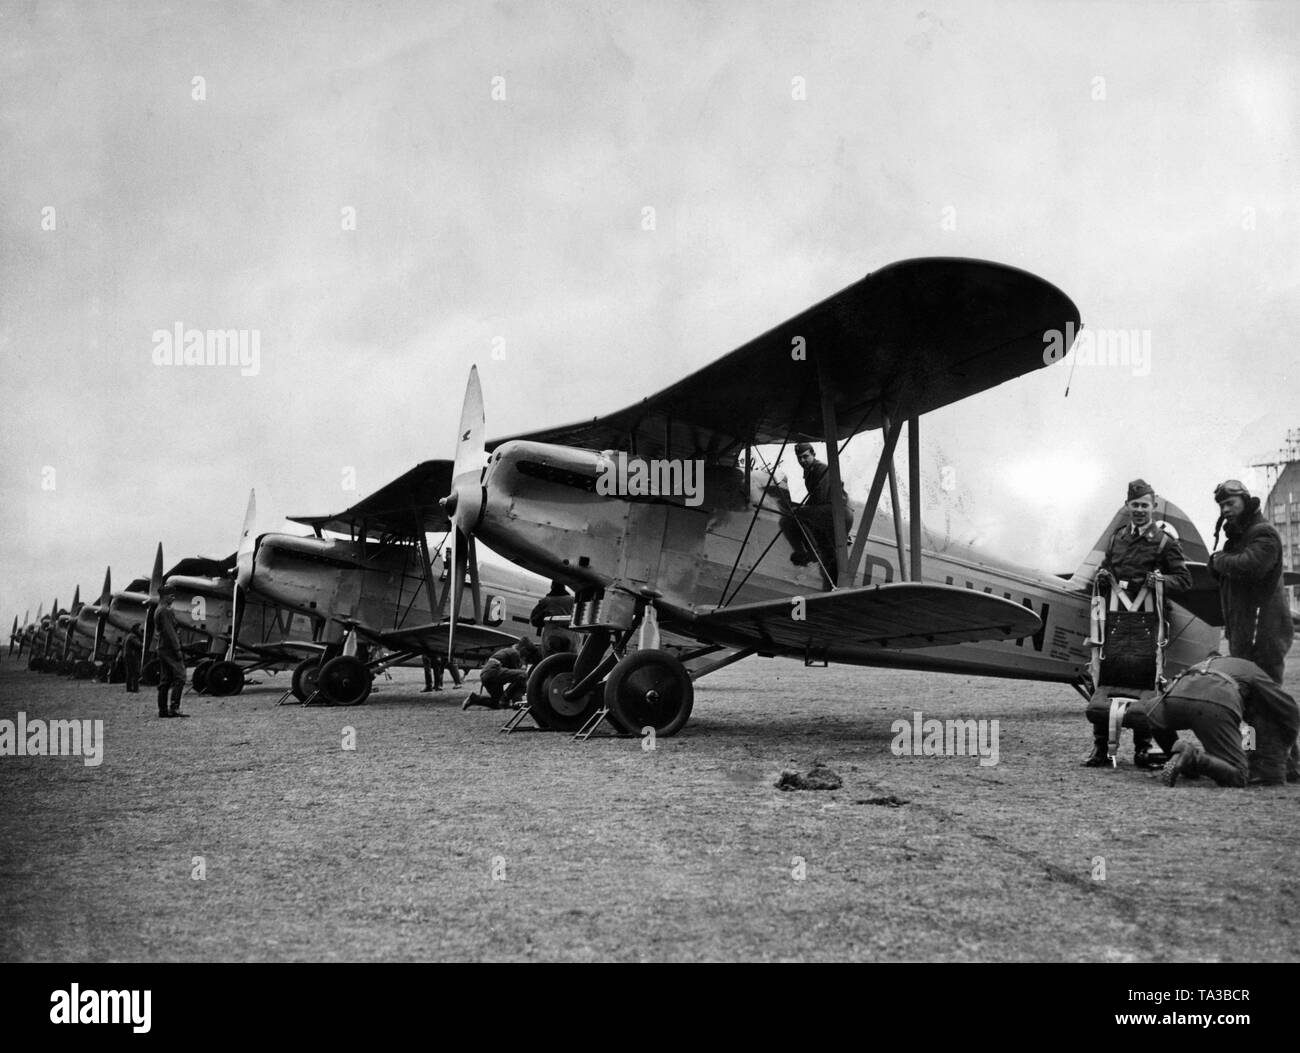 The picture shows fighter aircrafts of the German Luftwaffe at an airport, these are aircrafts of the type Arado Ar 65, a biplane was designed as a fighter aircraft. The series models were introduced on a large scale to the Luftwaffe (founded in 1935) of the Wehrmacht. Stock Photo